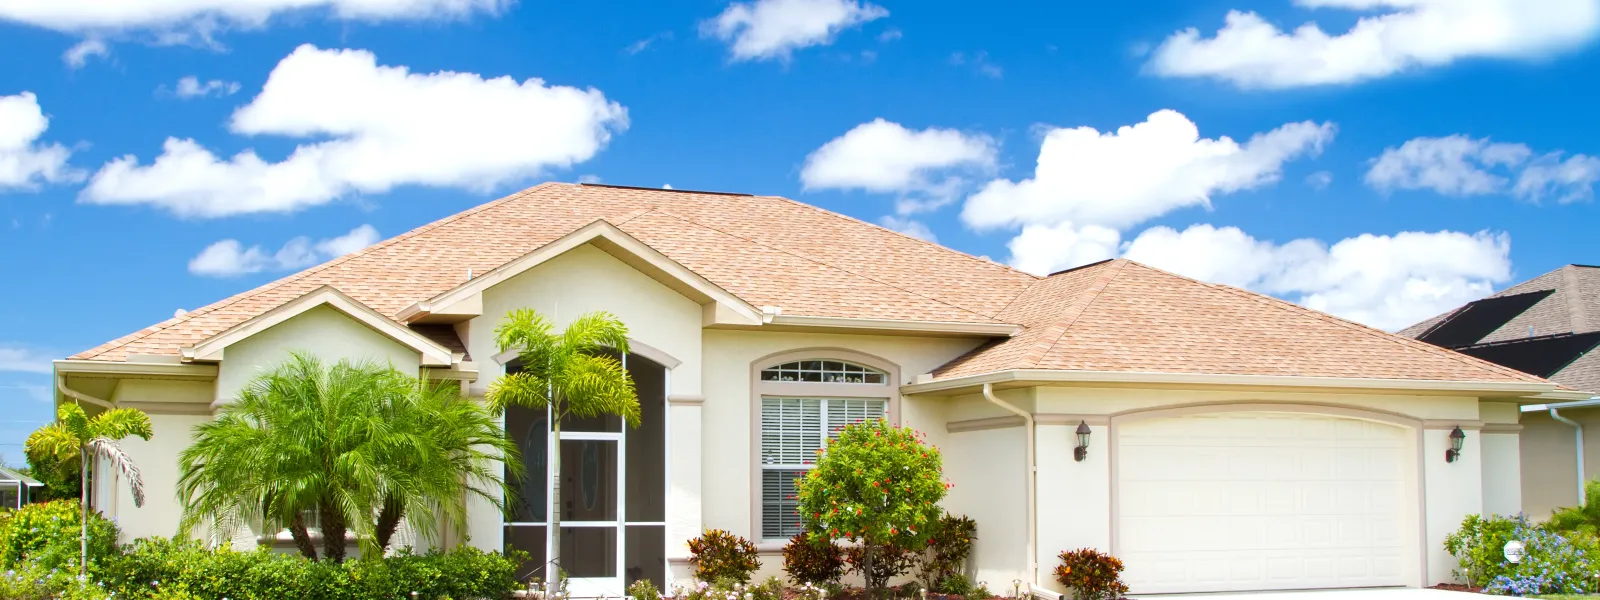 ARAC Roof It Forward Roof Replacement in Southwest Florida